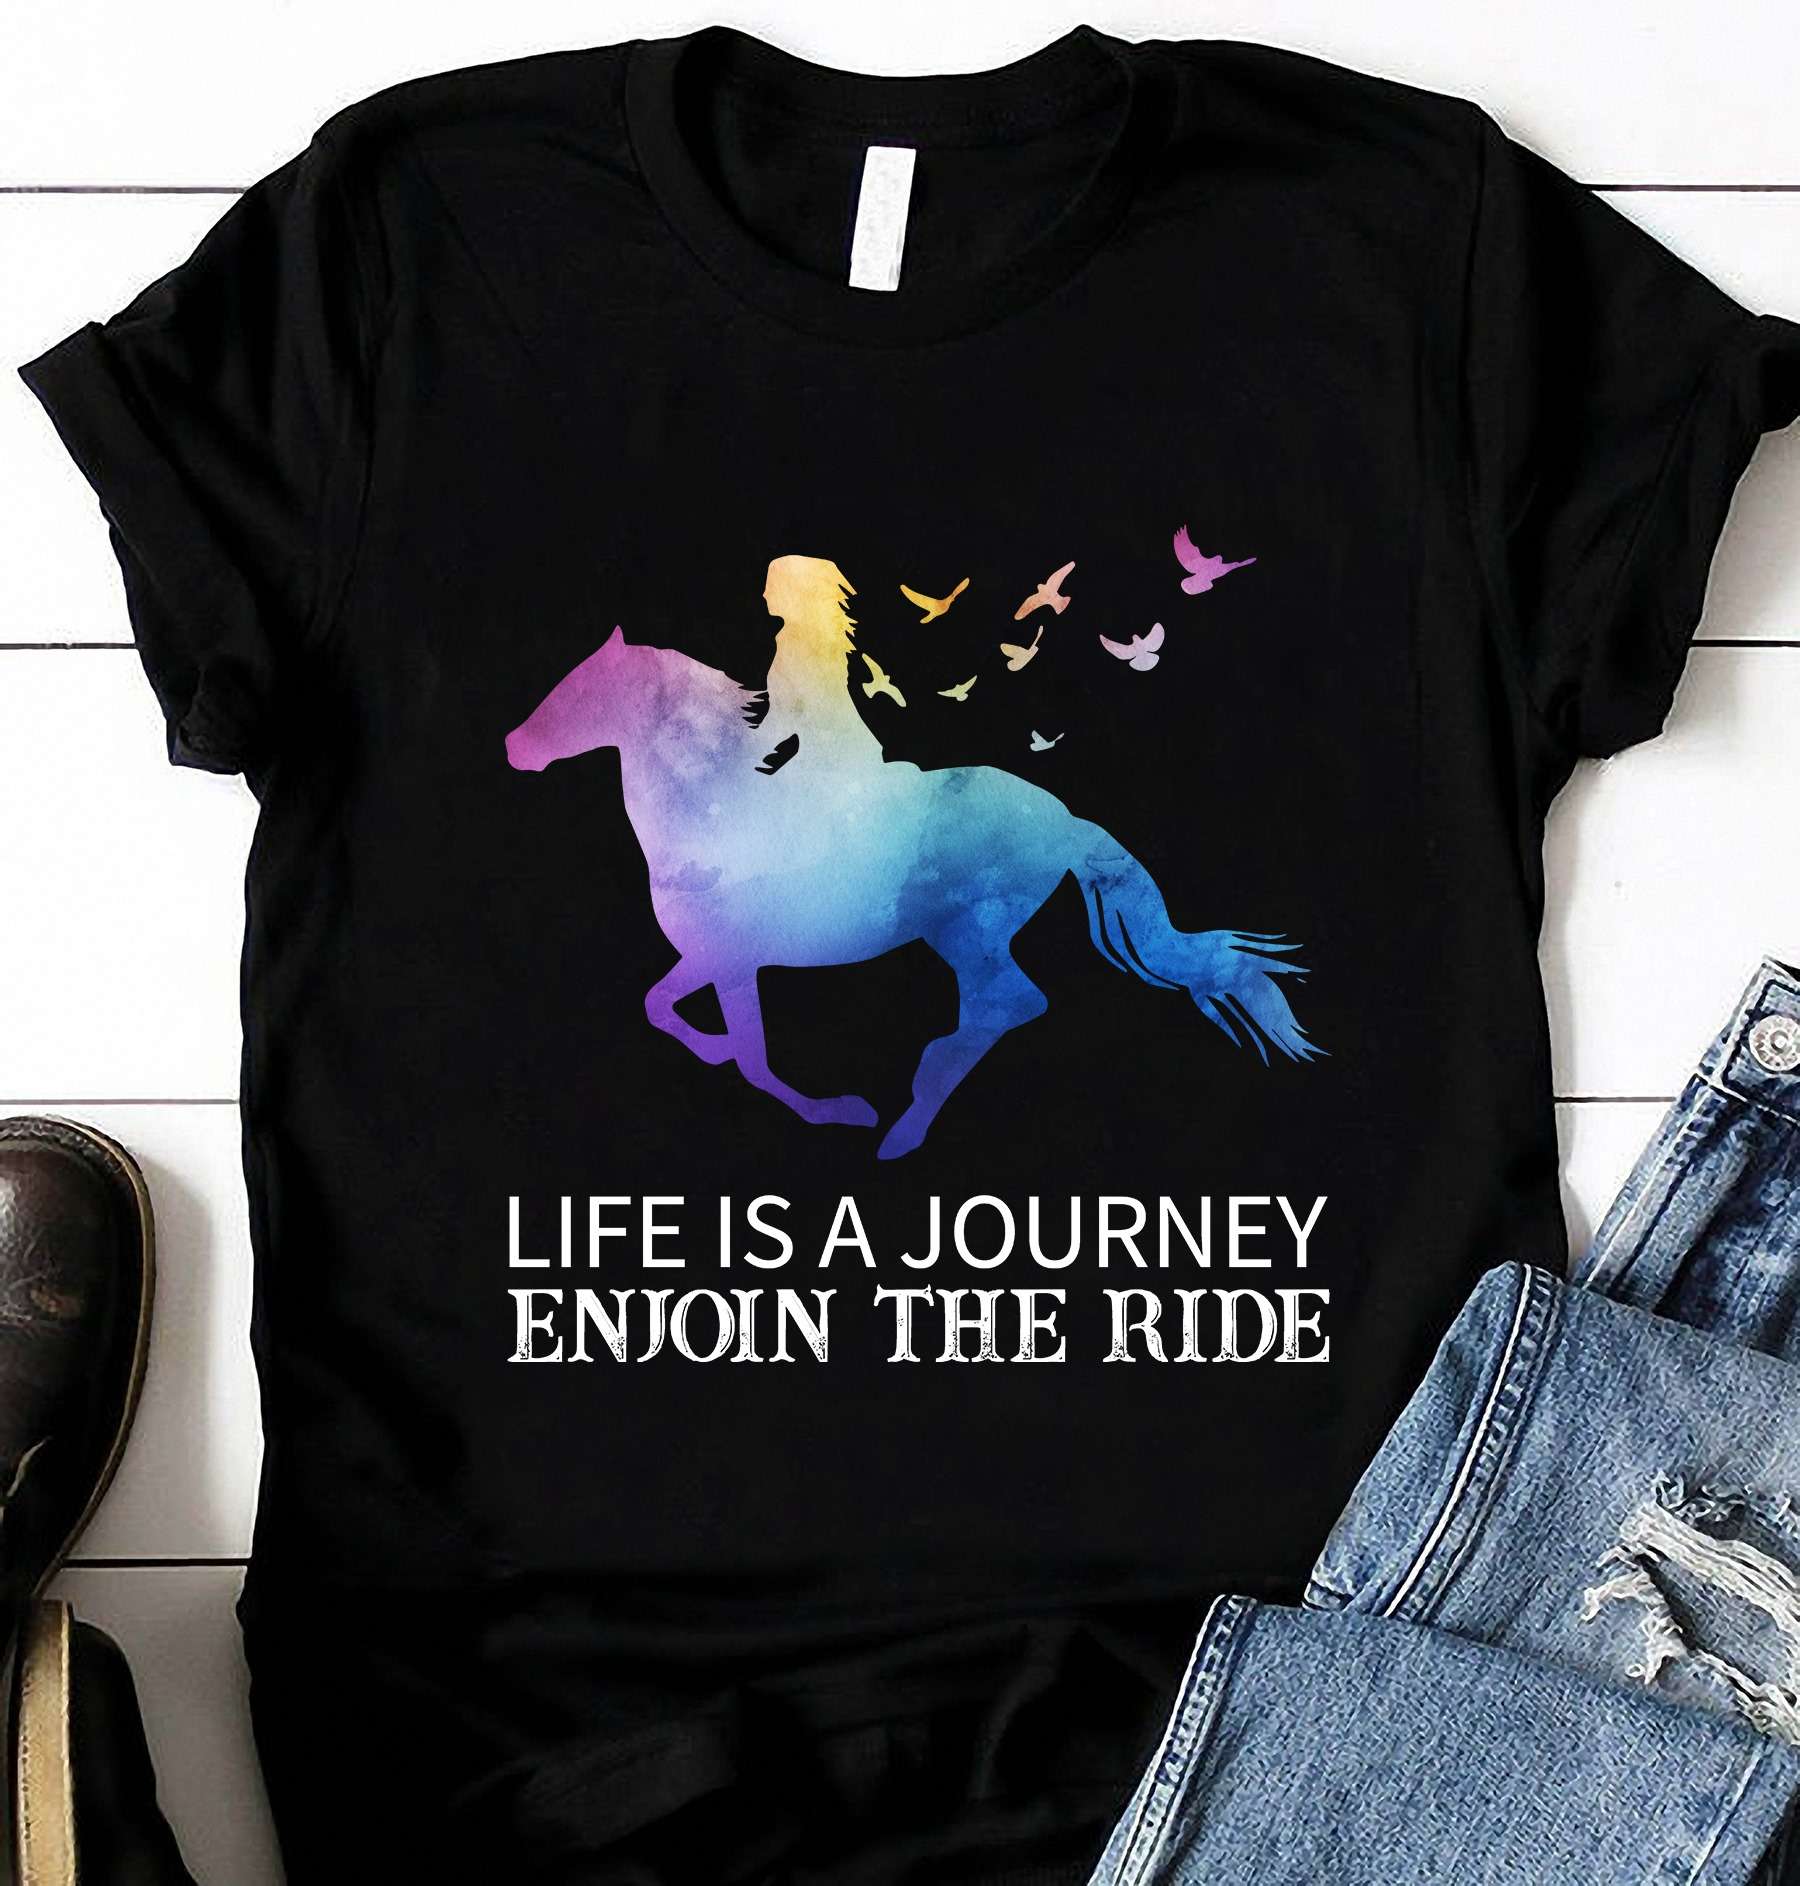 Life is a journey, enjoy the ride - Woman riding horse